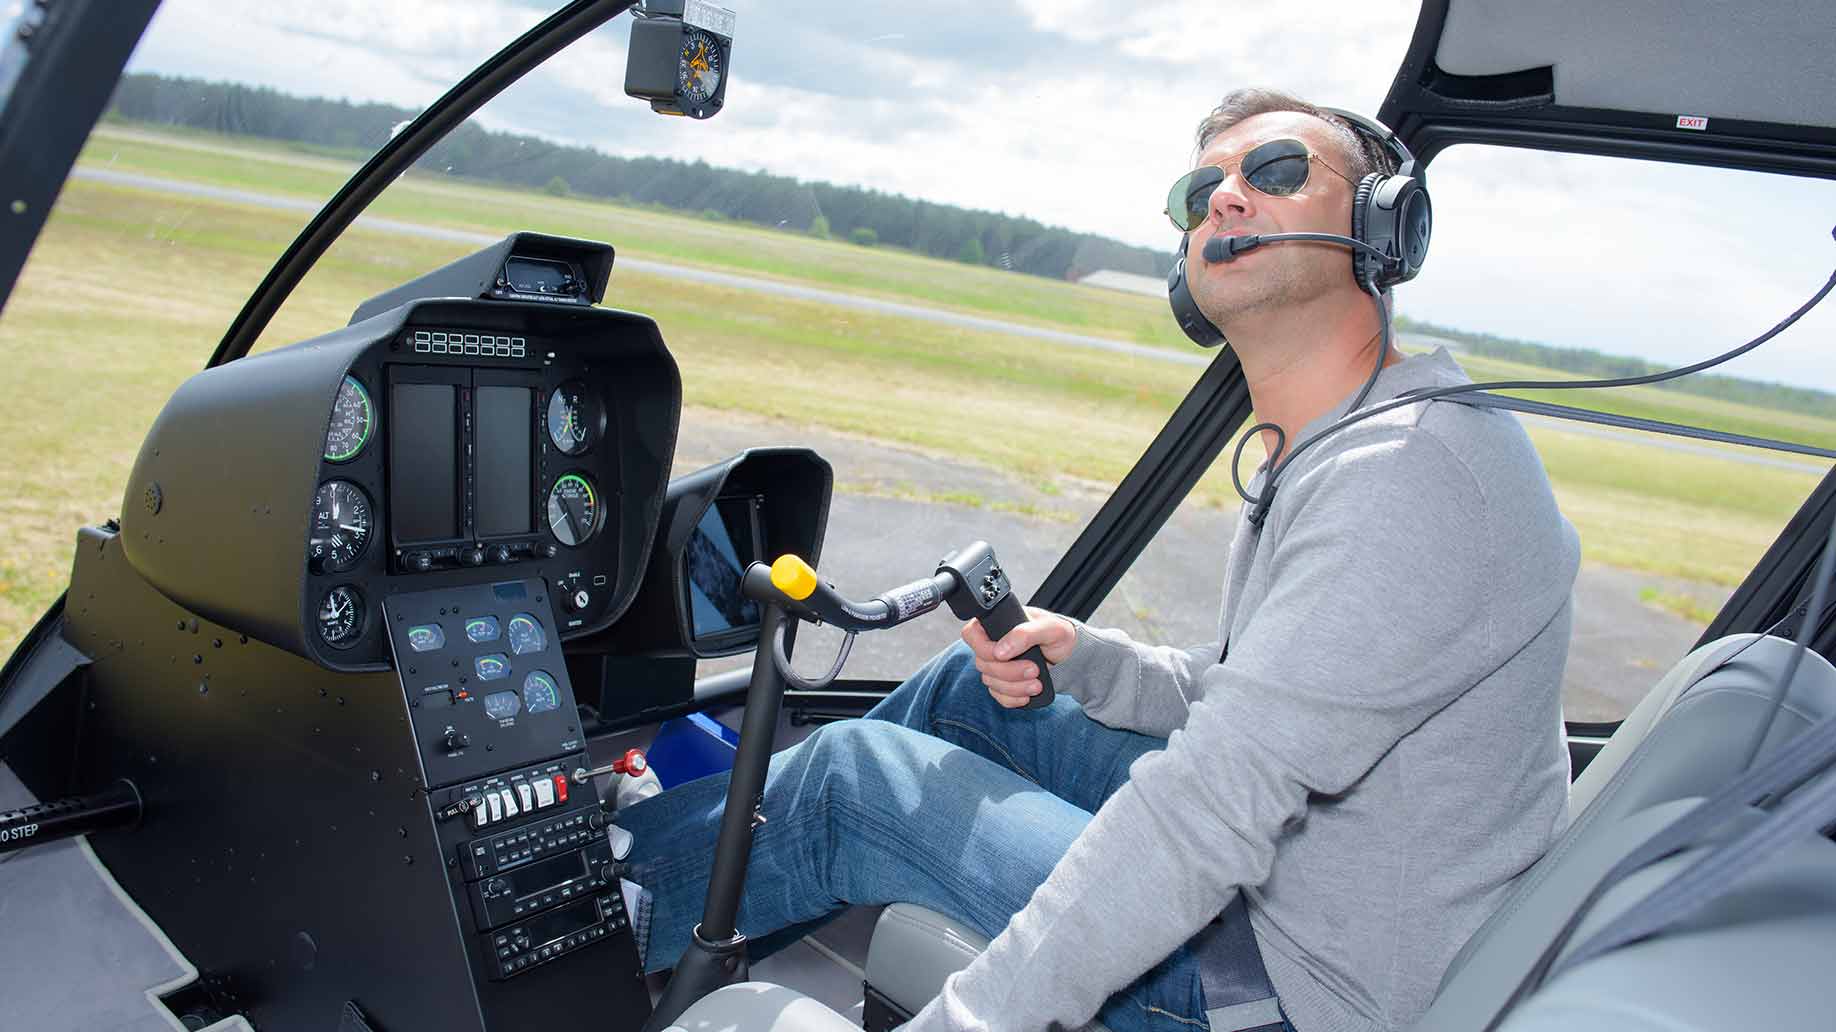 Where can you find helicopter pilots for hire?